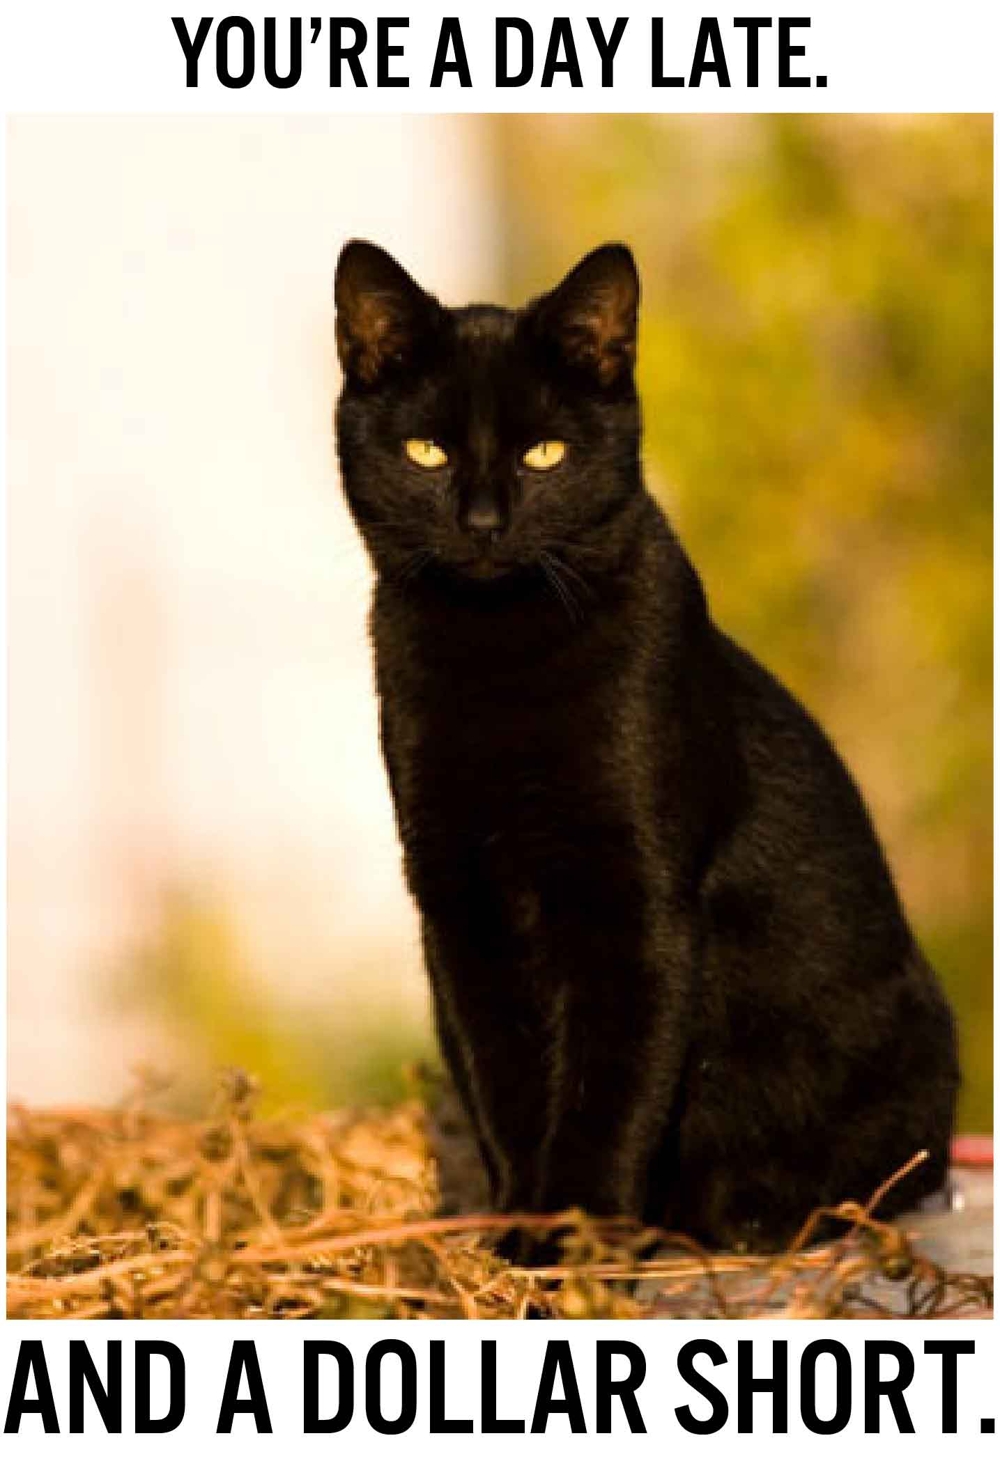 The History And Creepy Images Of Black Cats. Warning: Some are pretty disturbing!